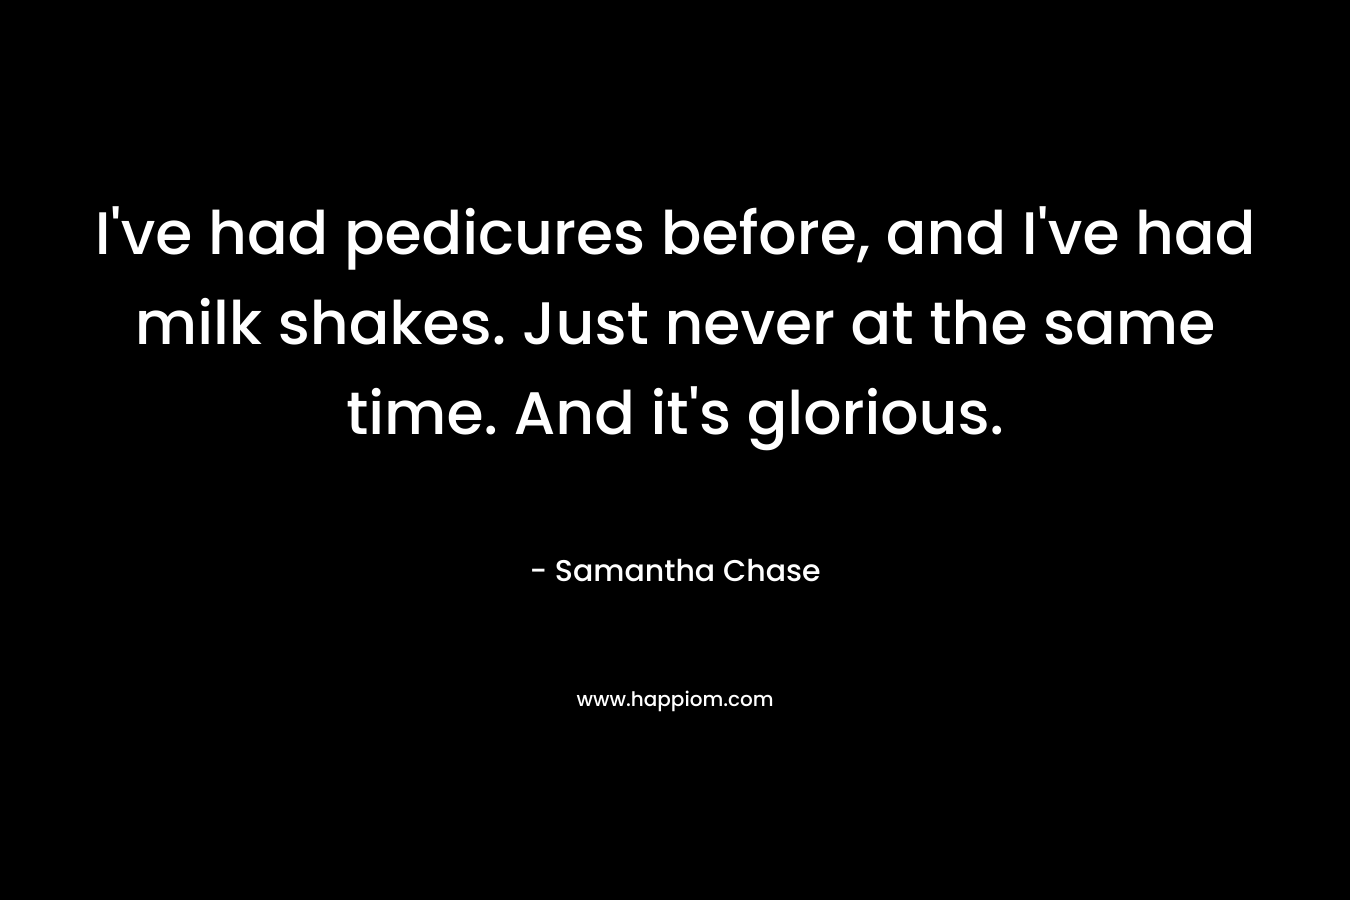 I’ve had pedicures before, and I’ve had milk shakes. Just never at the same time. And it’s glorious. – Samantha Chase